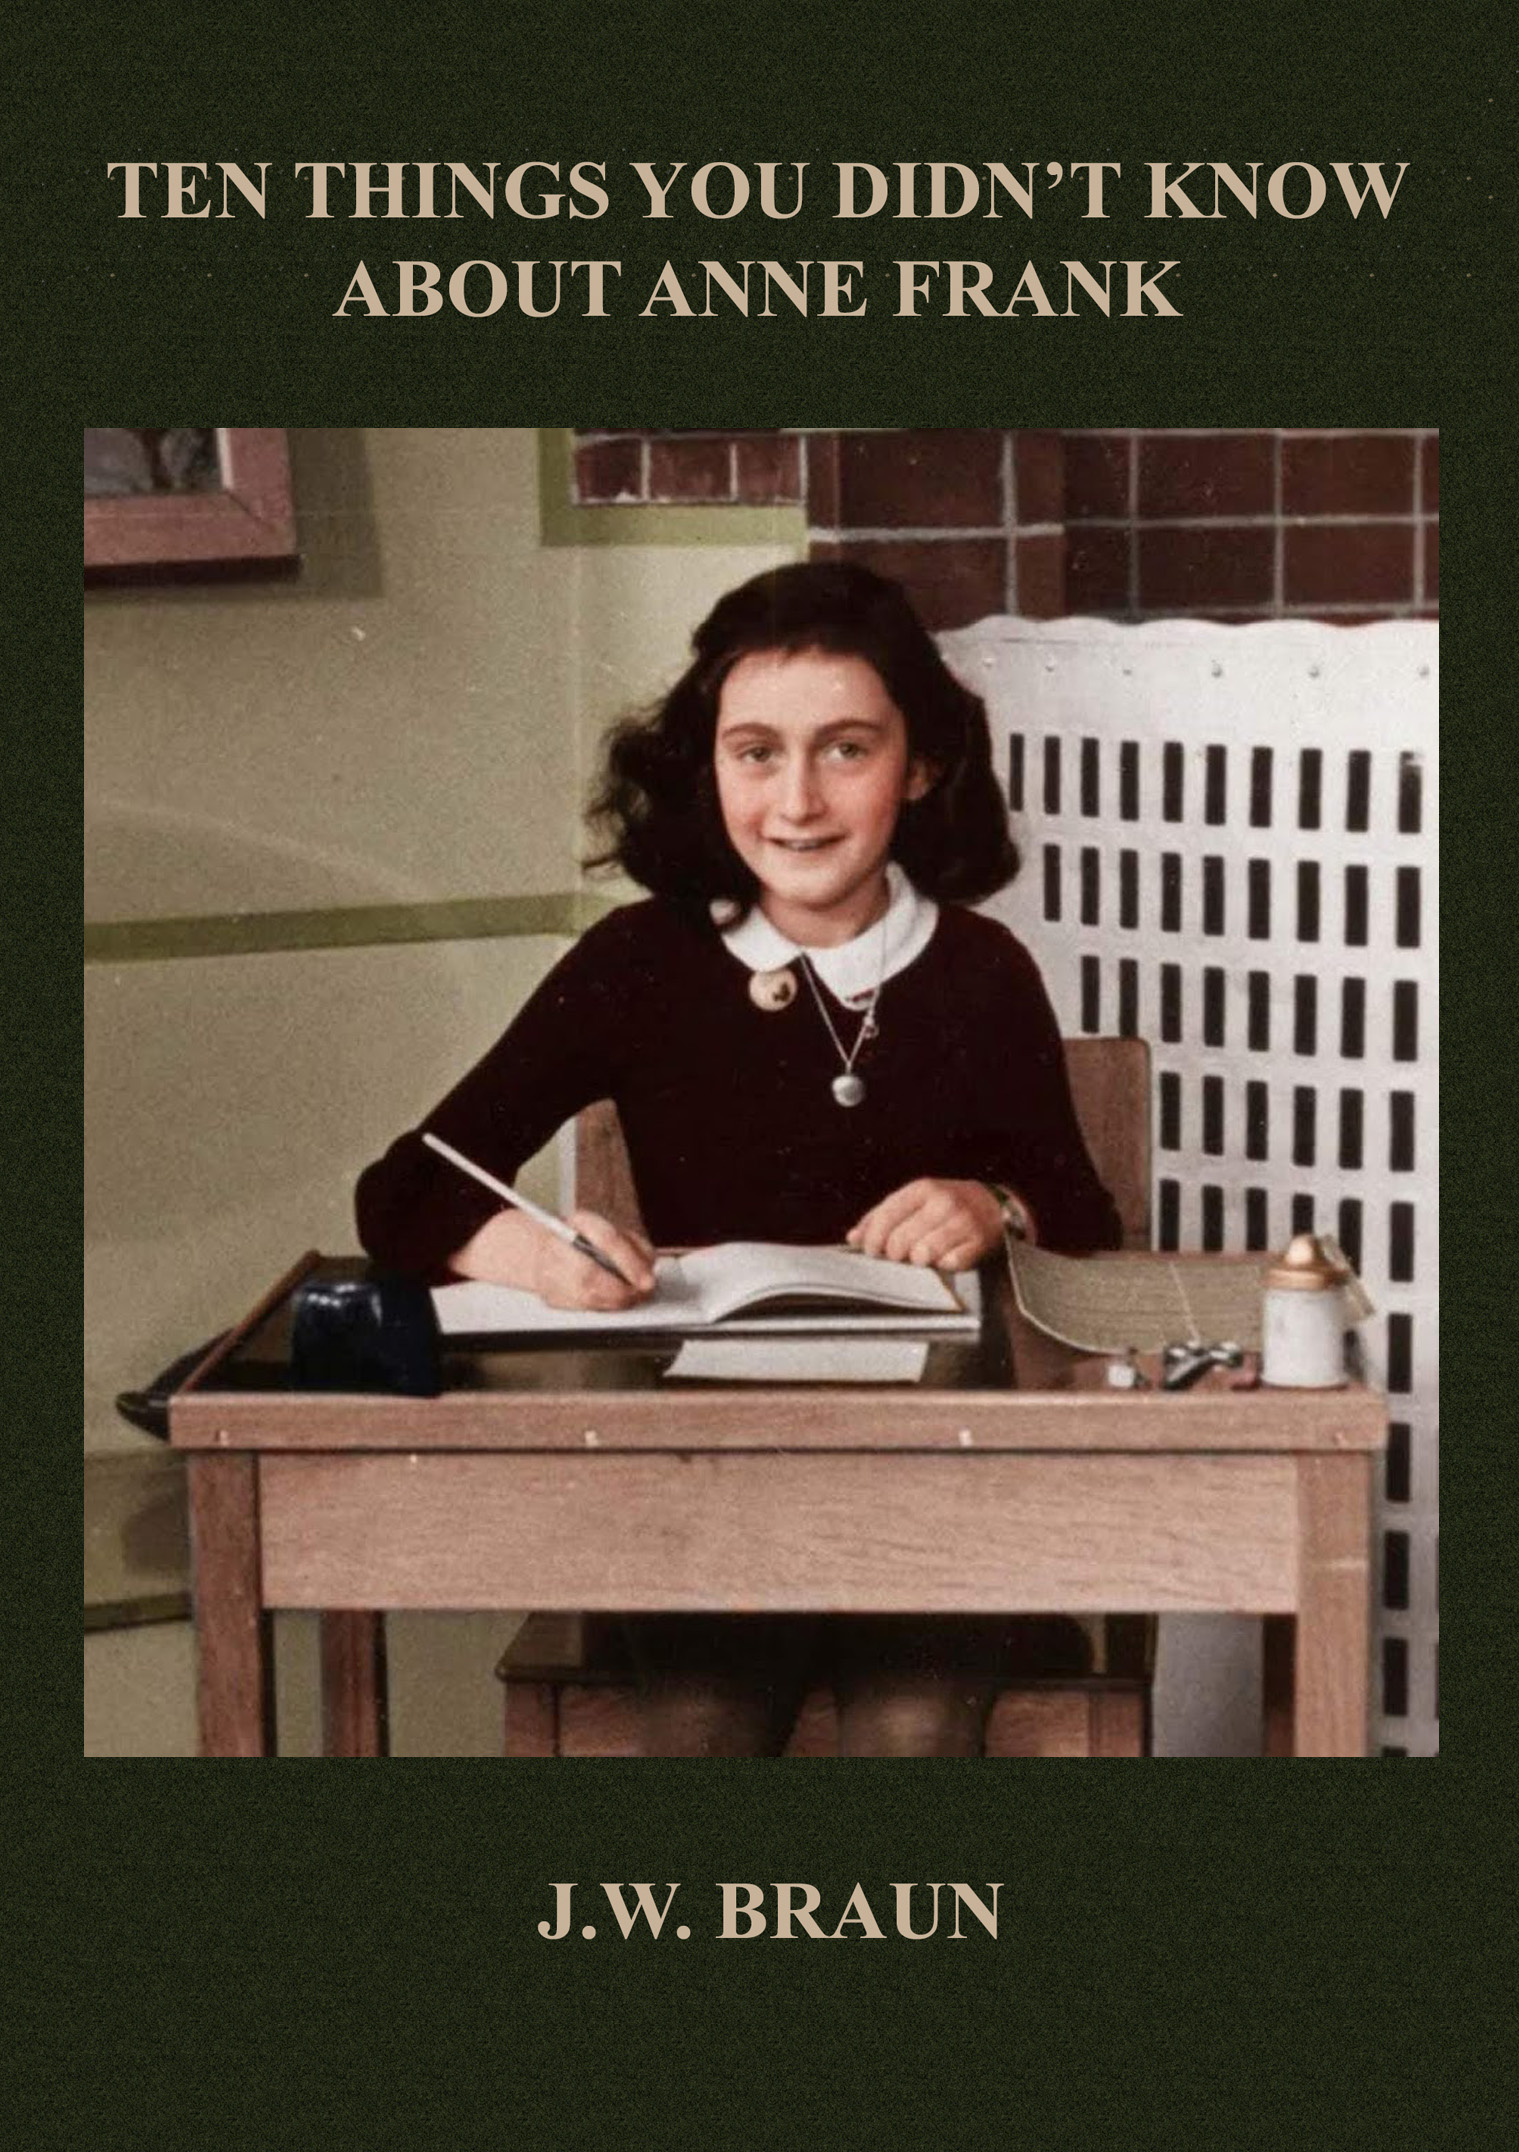 Ten Things You Didn't Know About Anne Frank